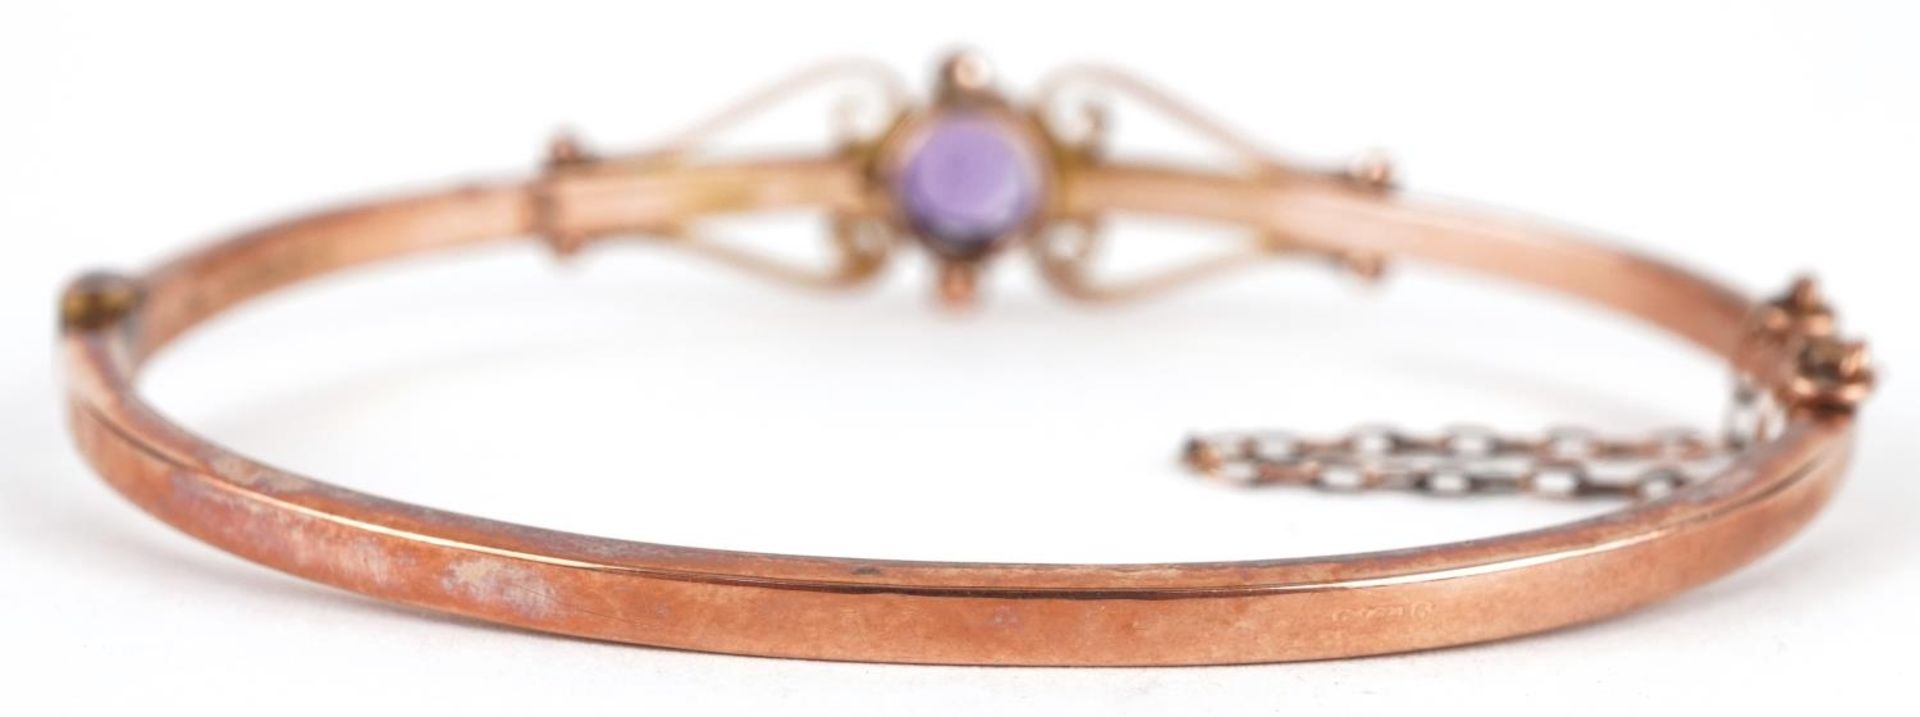 Edwardian 9ct rose gold amethyst bangle with scrolled decoration, the amethyst approximately 6.6mm - Image 2 of 4